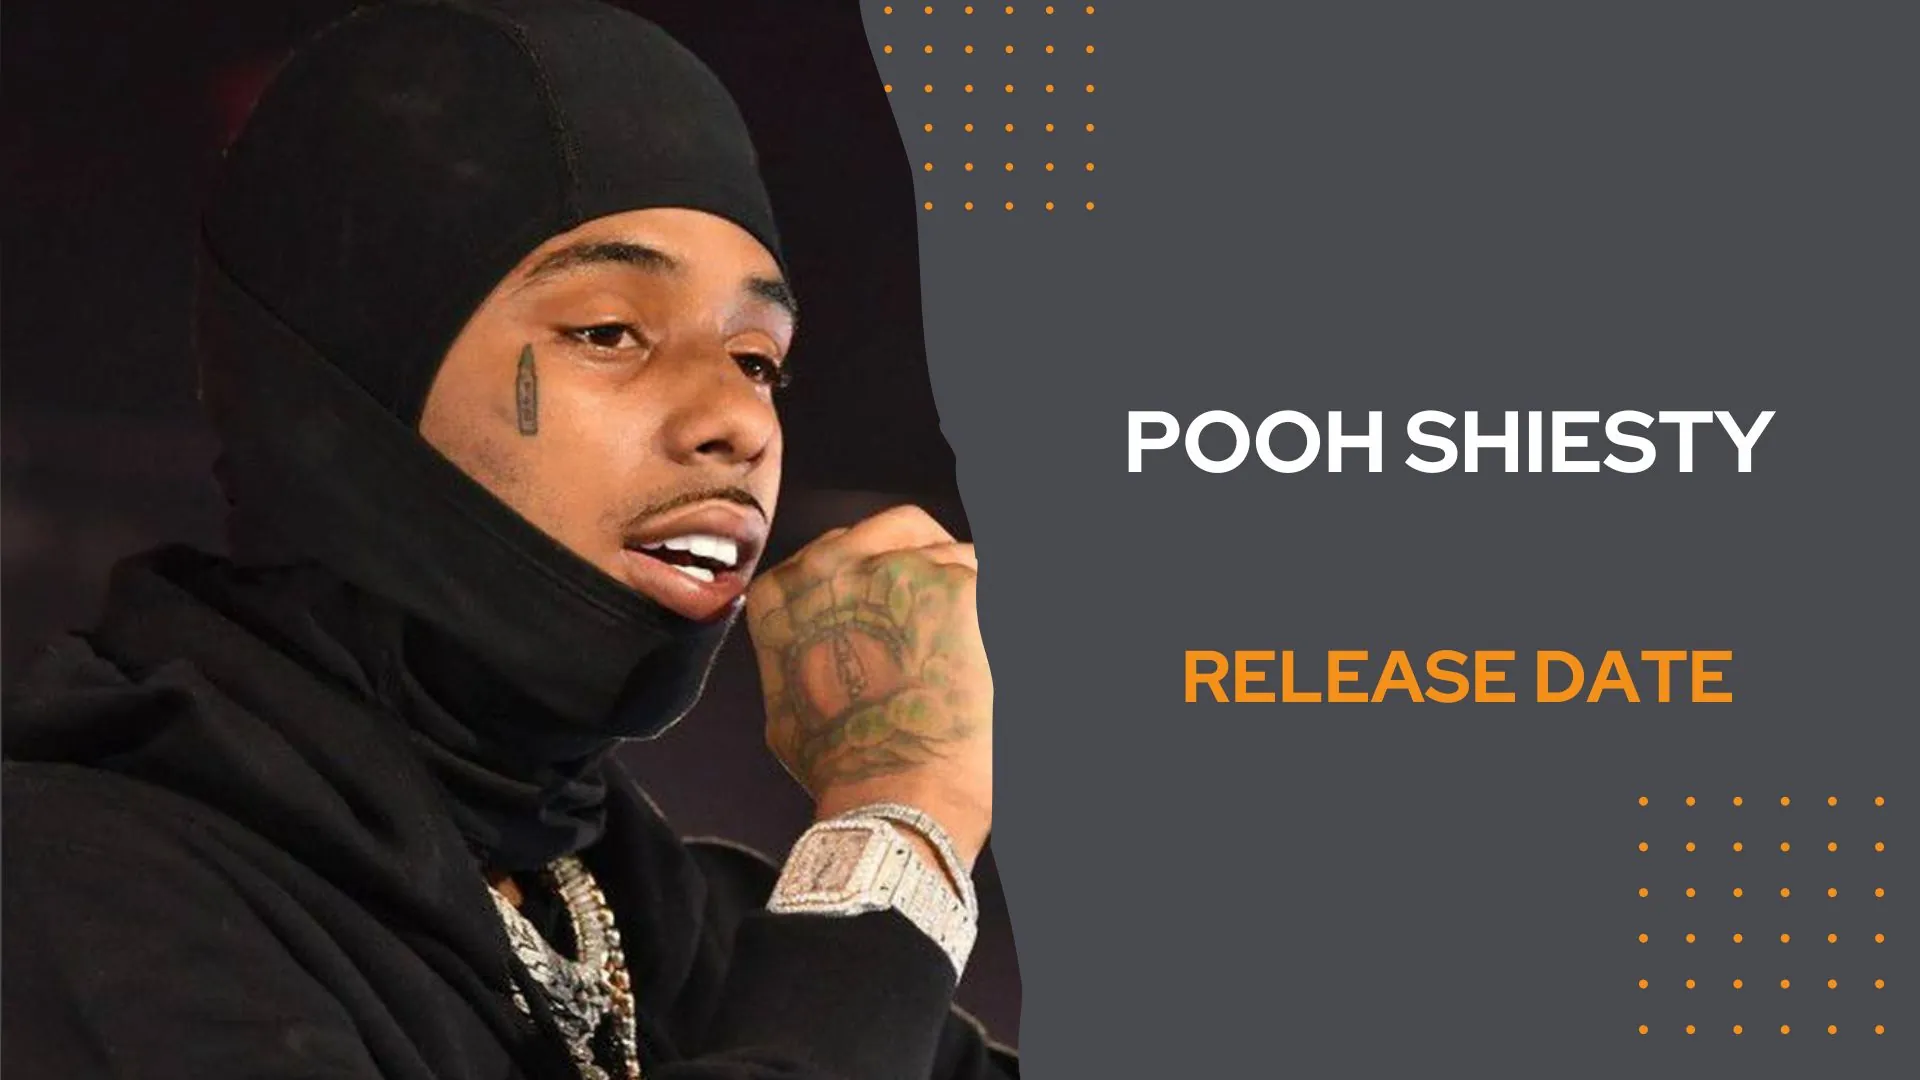 Pooh Shiesty Release Date From Prison - Why Did He Go To Jail?